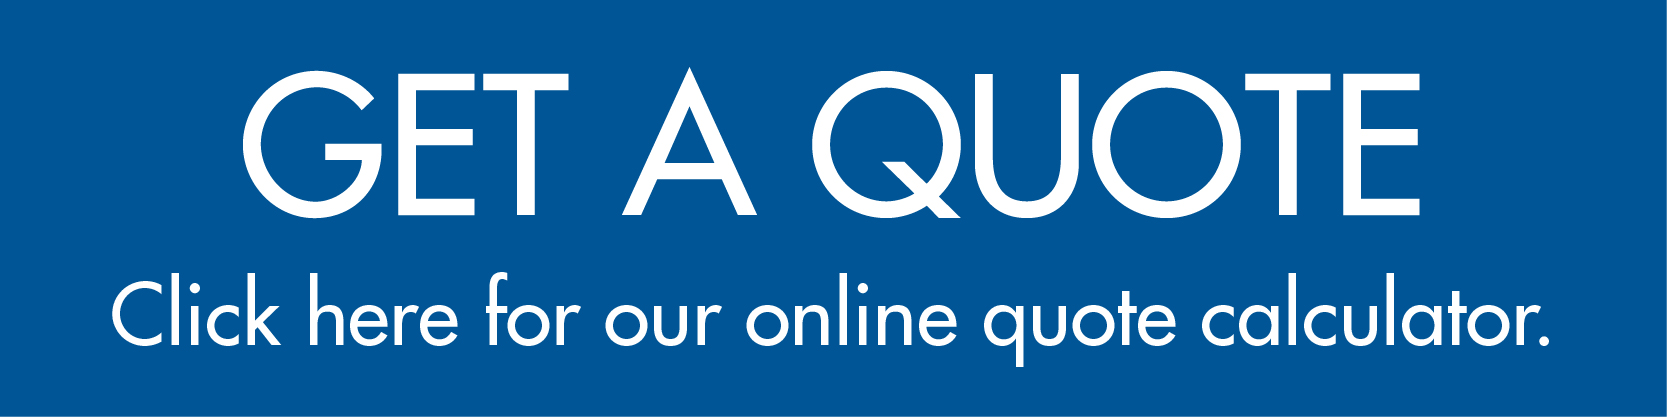 Get a quote. Click here for our online quote calculator.